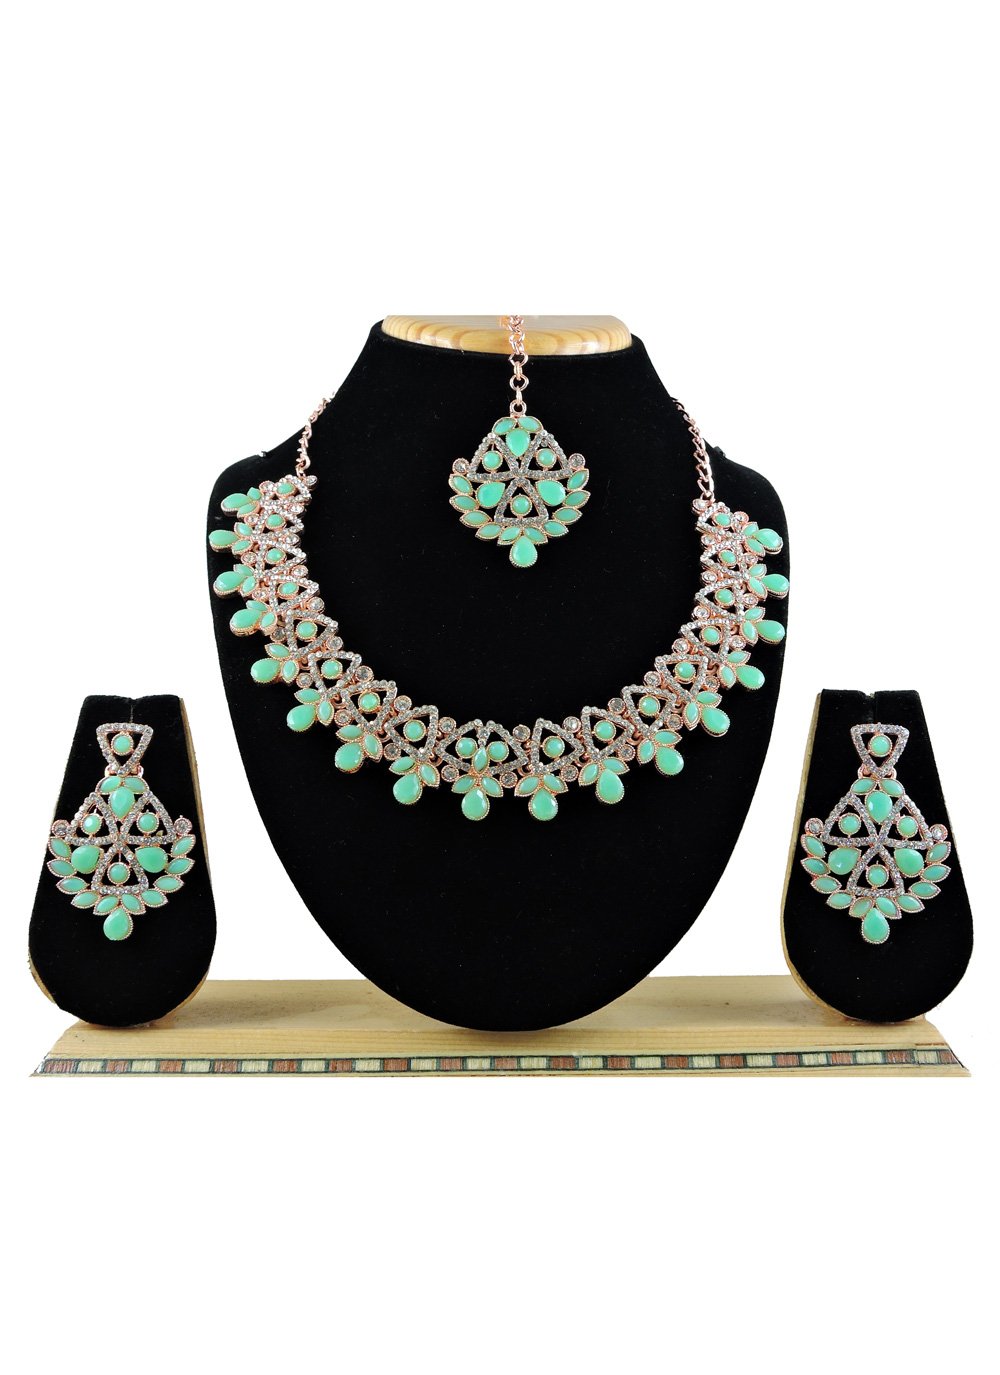 Lordly Sea Green and White Gold Rodium Polish Necklace Set